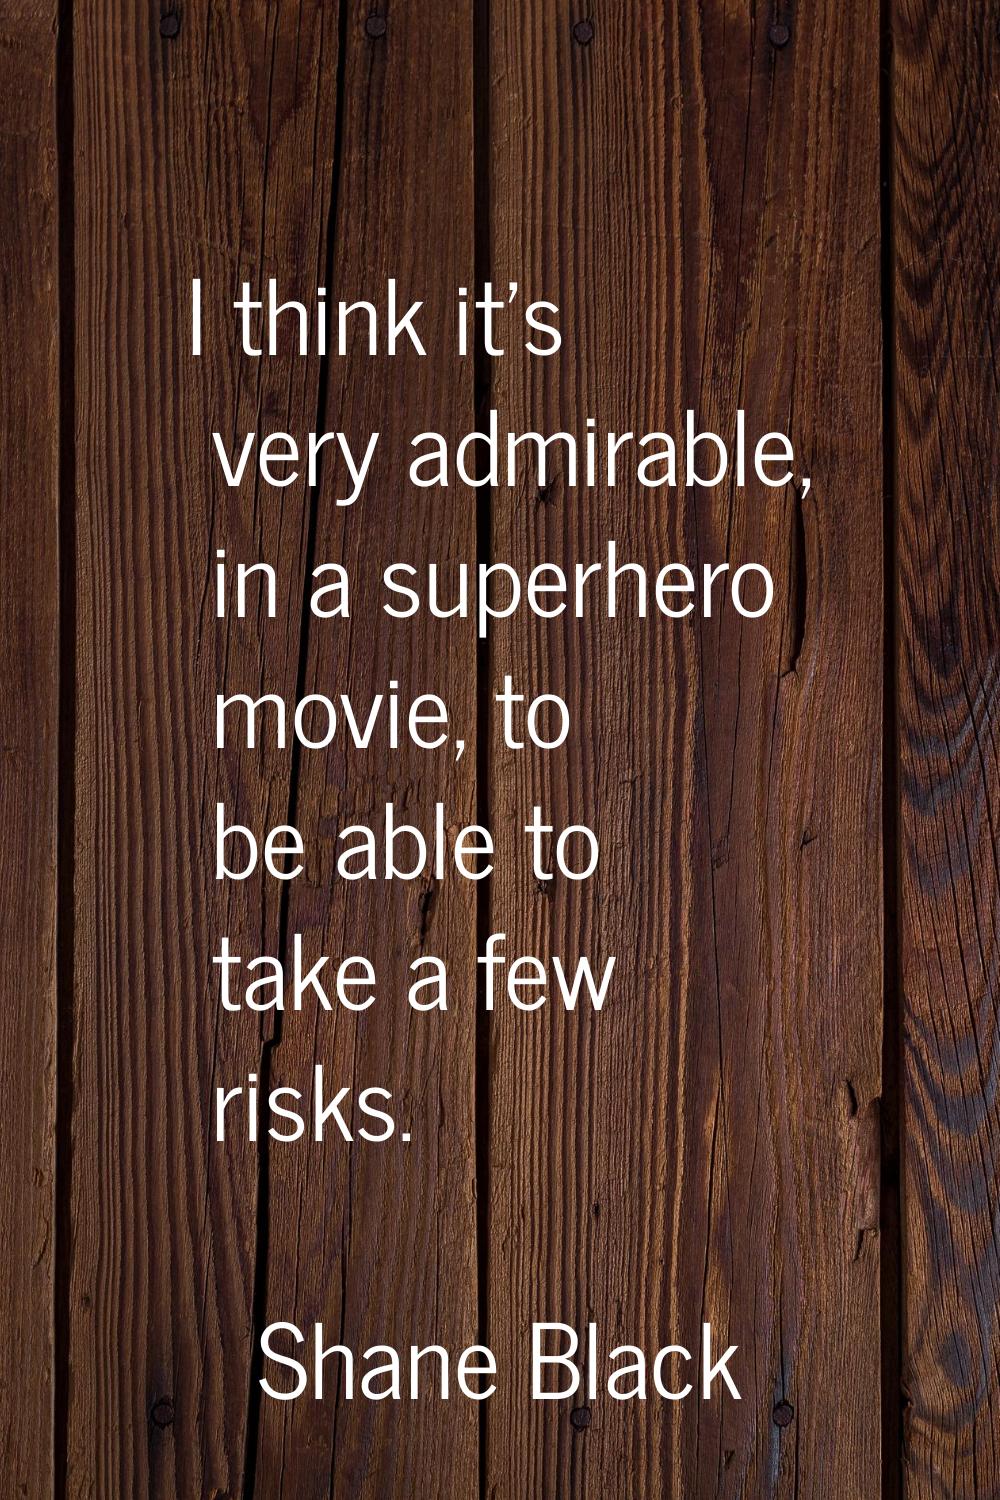 I think it's very admirable, in a superhero movie, to be able to take a few risks.